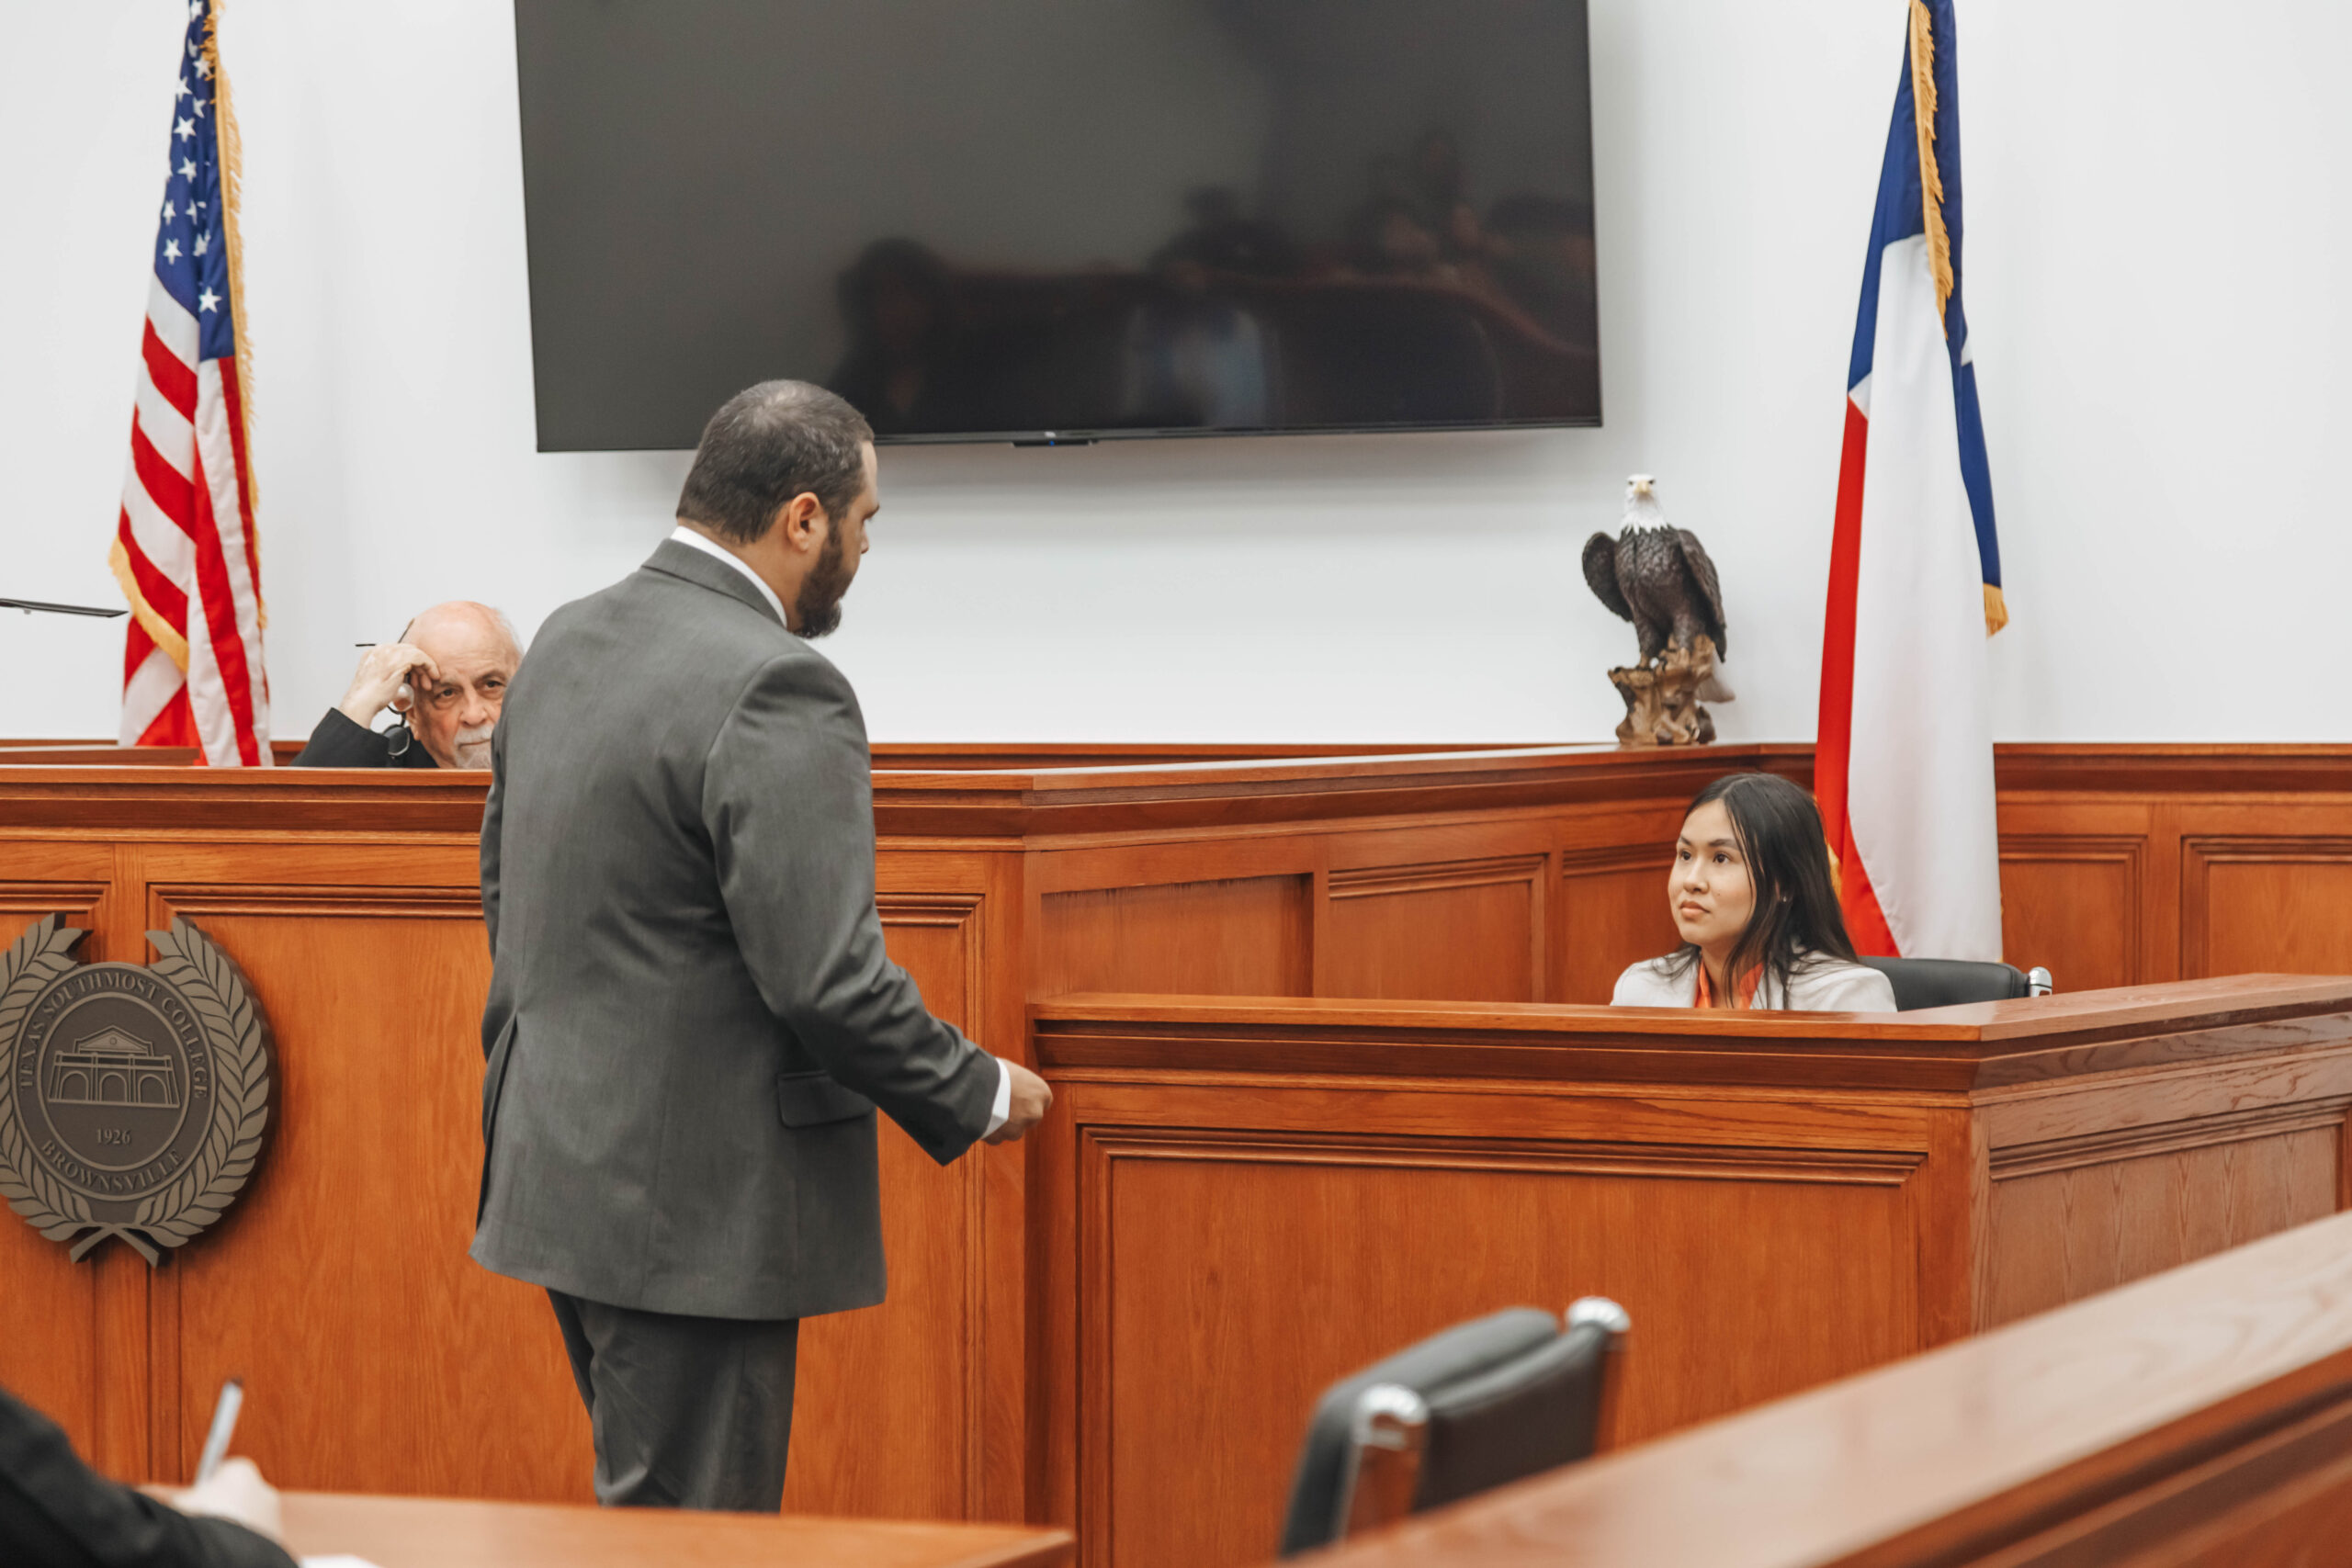 Texas Southmost College hosted its first mock trial in the brand new TSC Legal Center Courtroom on April 24, 2024. This gave Criminal Justice students a chance to witness and participate in a trial exactly as it would happen in the courts.